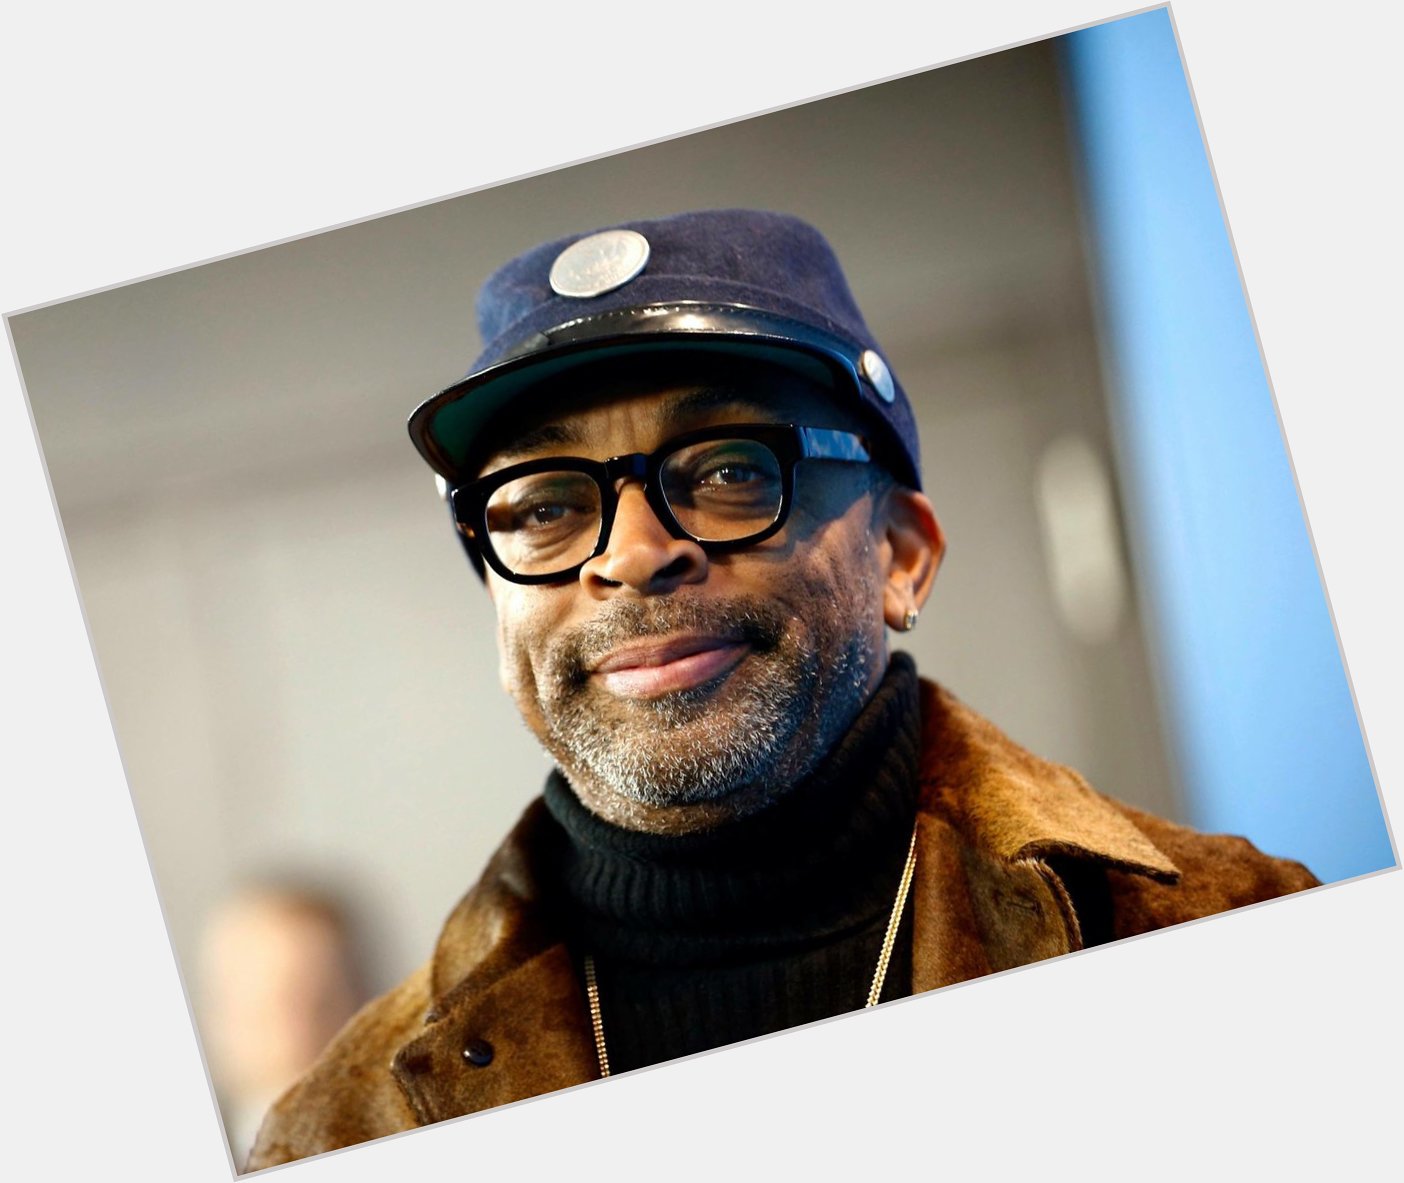 Happy Birthday to film director, producer, writer, and actor Spike Lee. turns 60 today. 